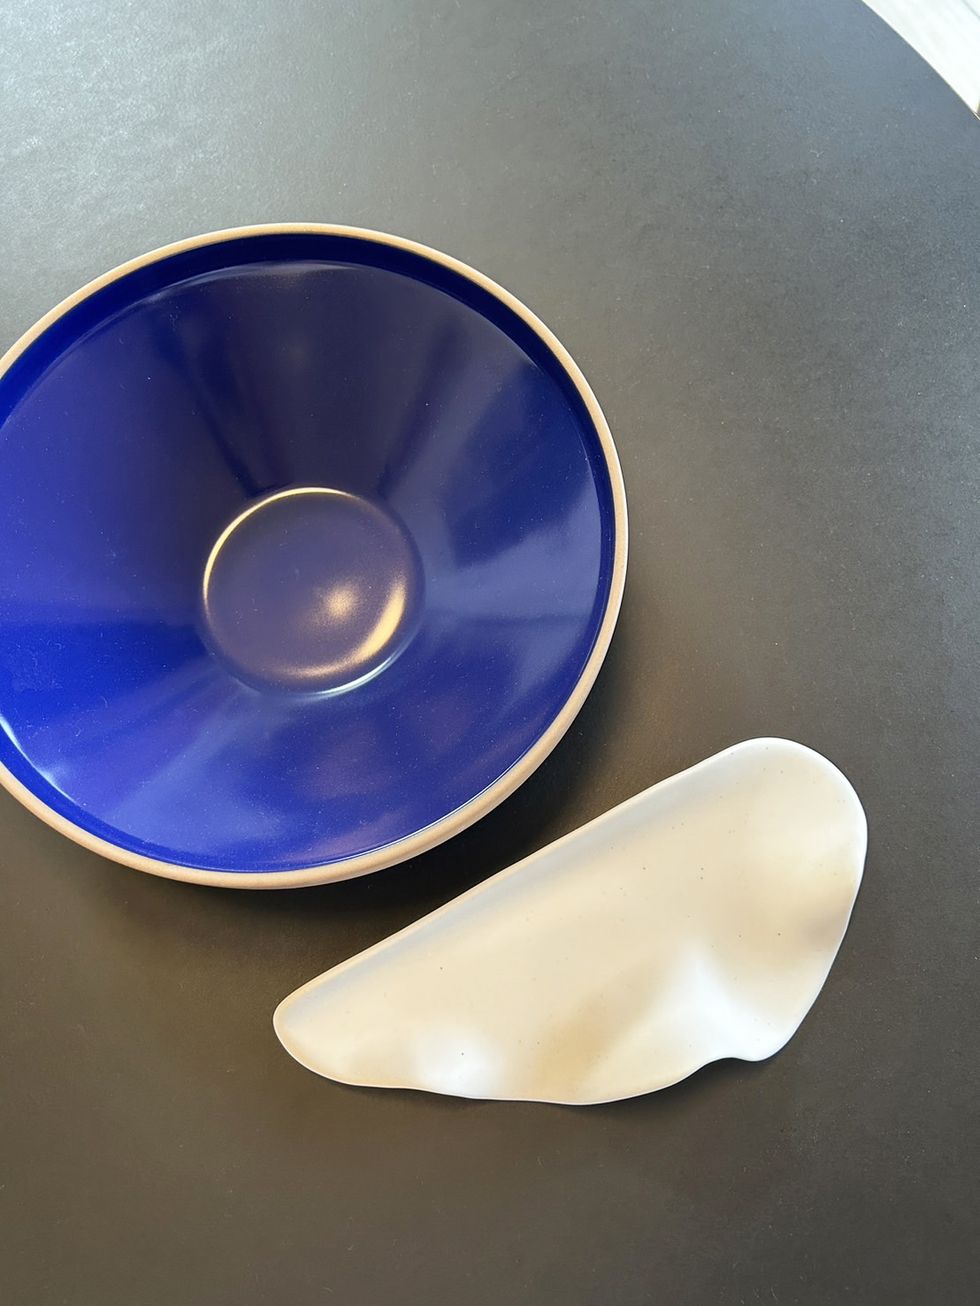 a blue plate with a white object on it